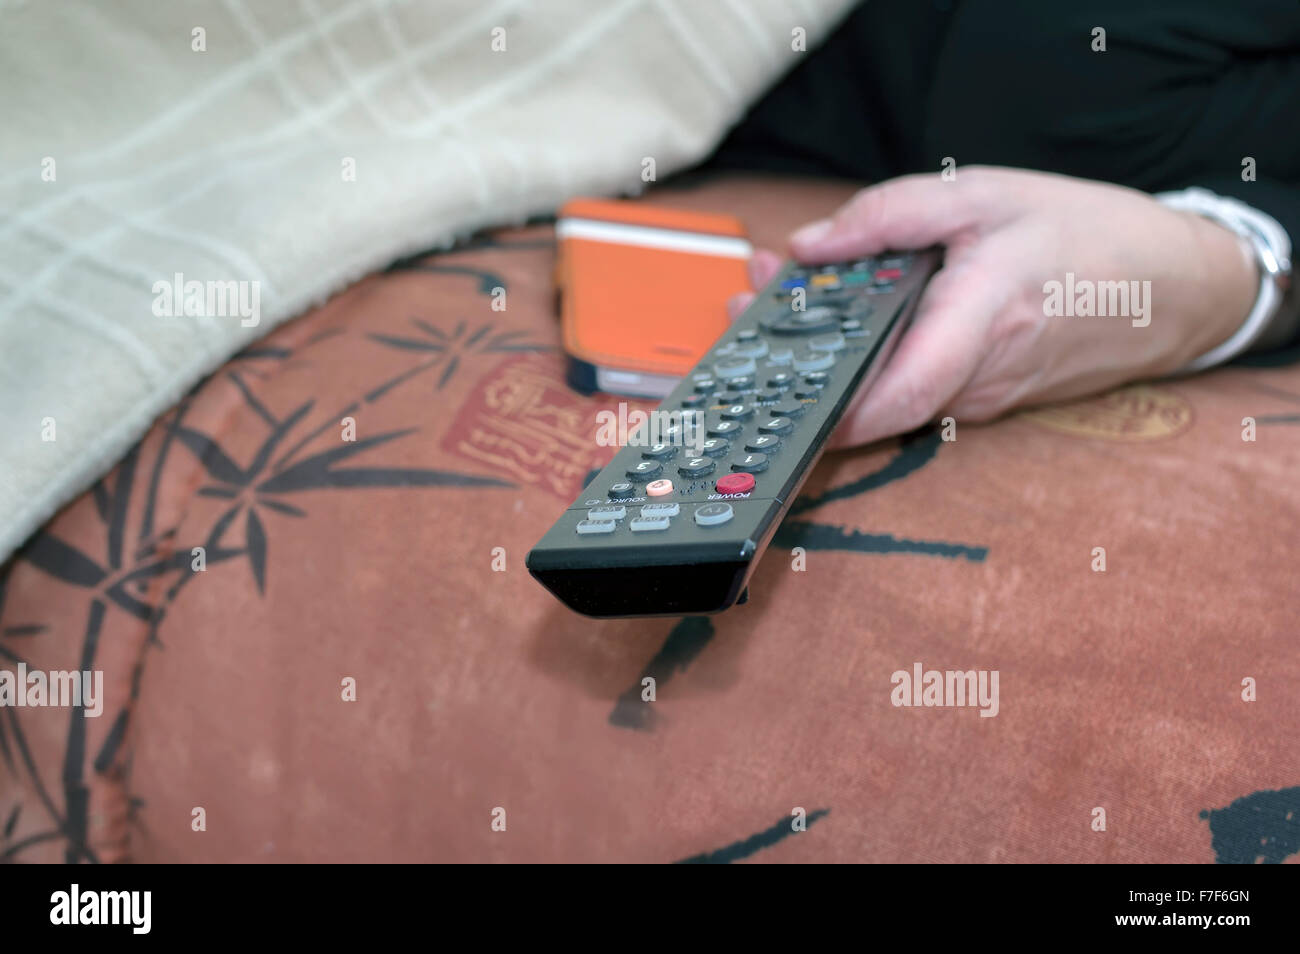 Hand with remote control Stock Photo